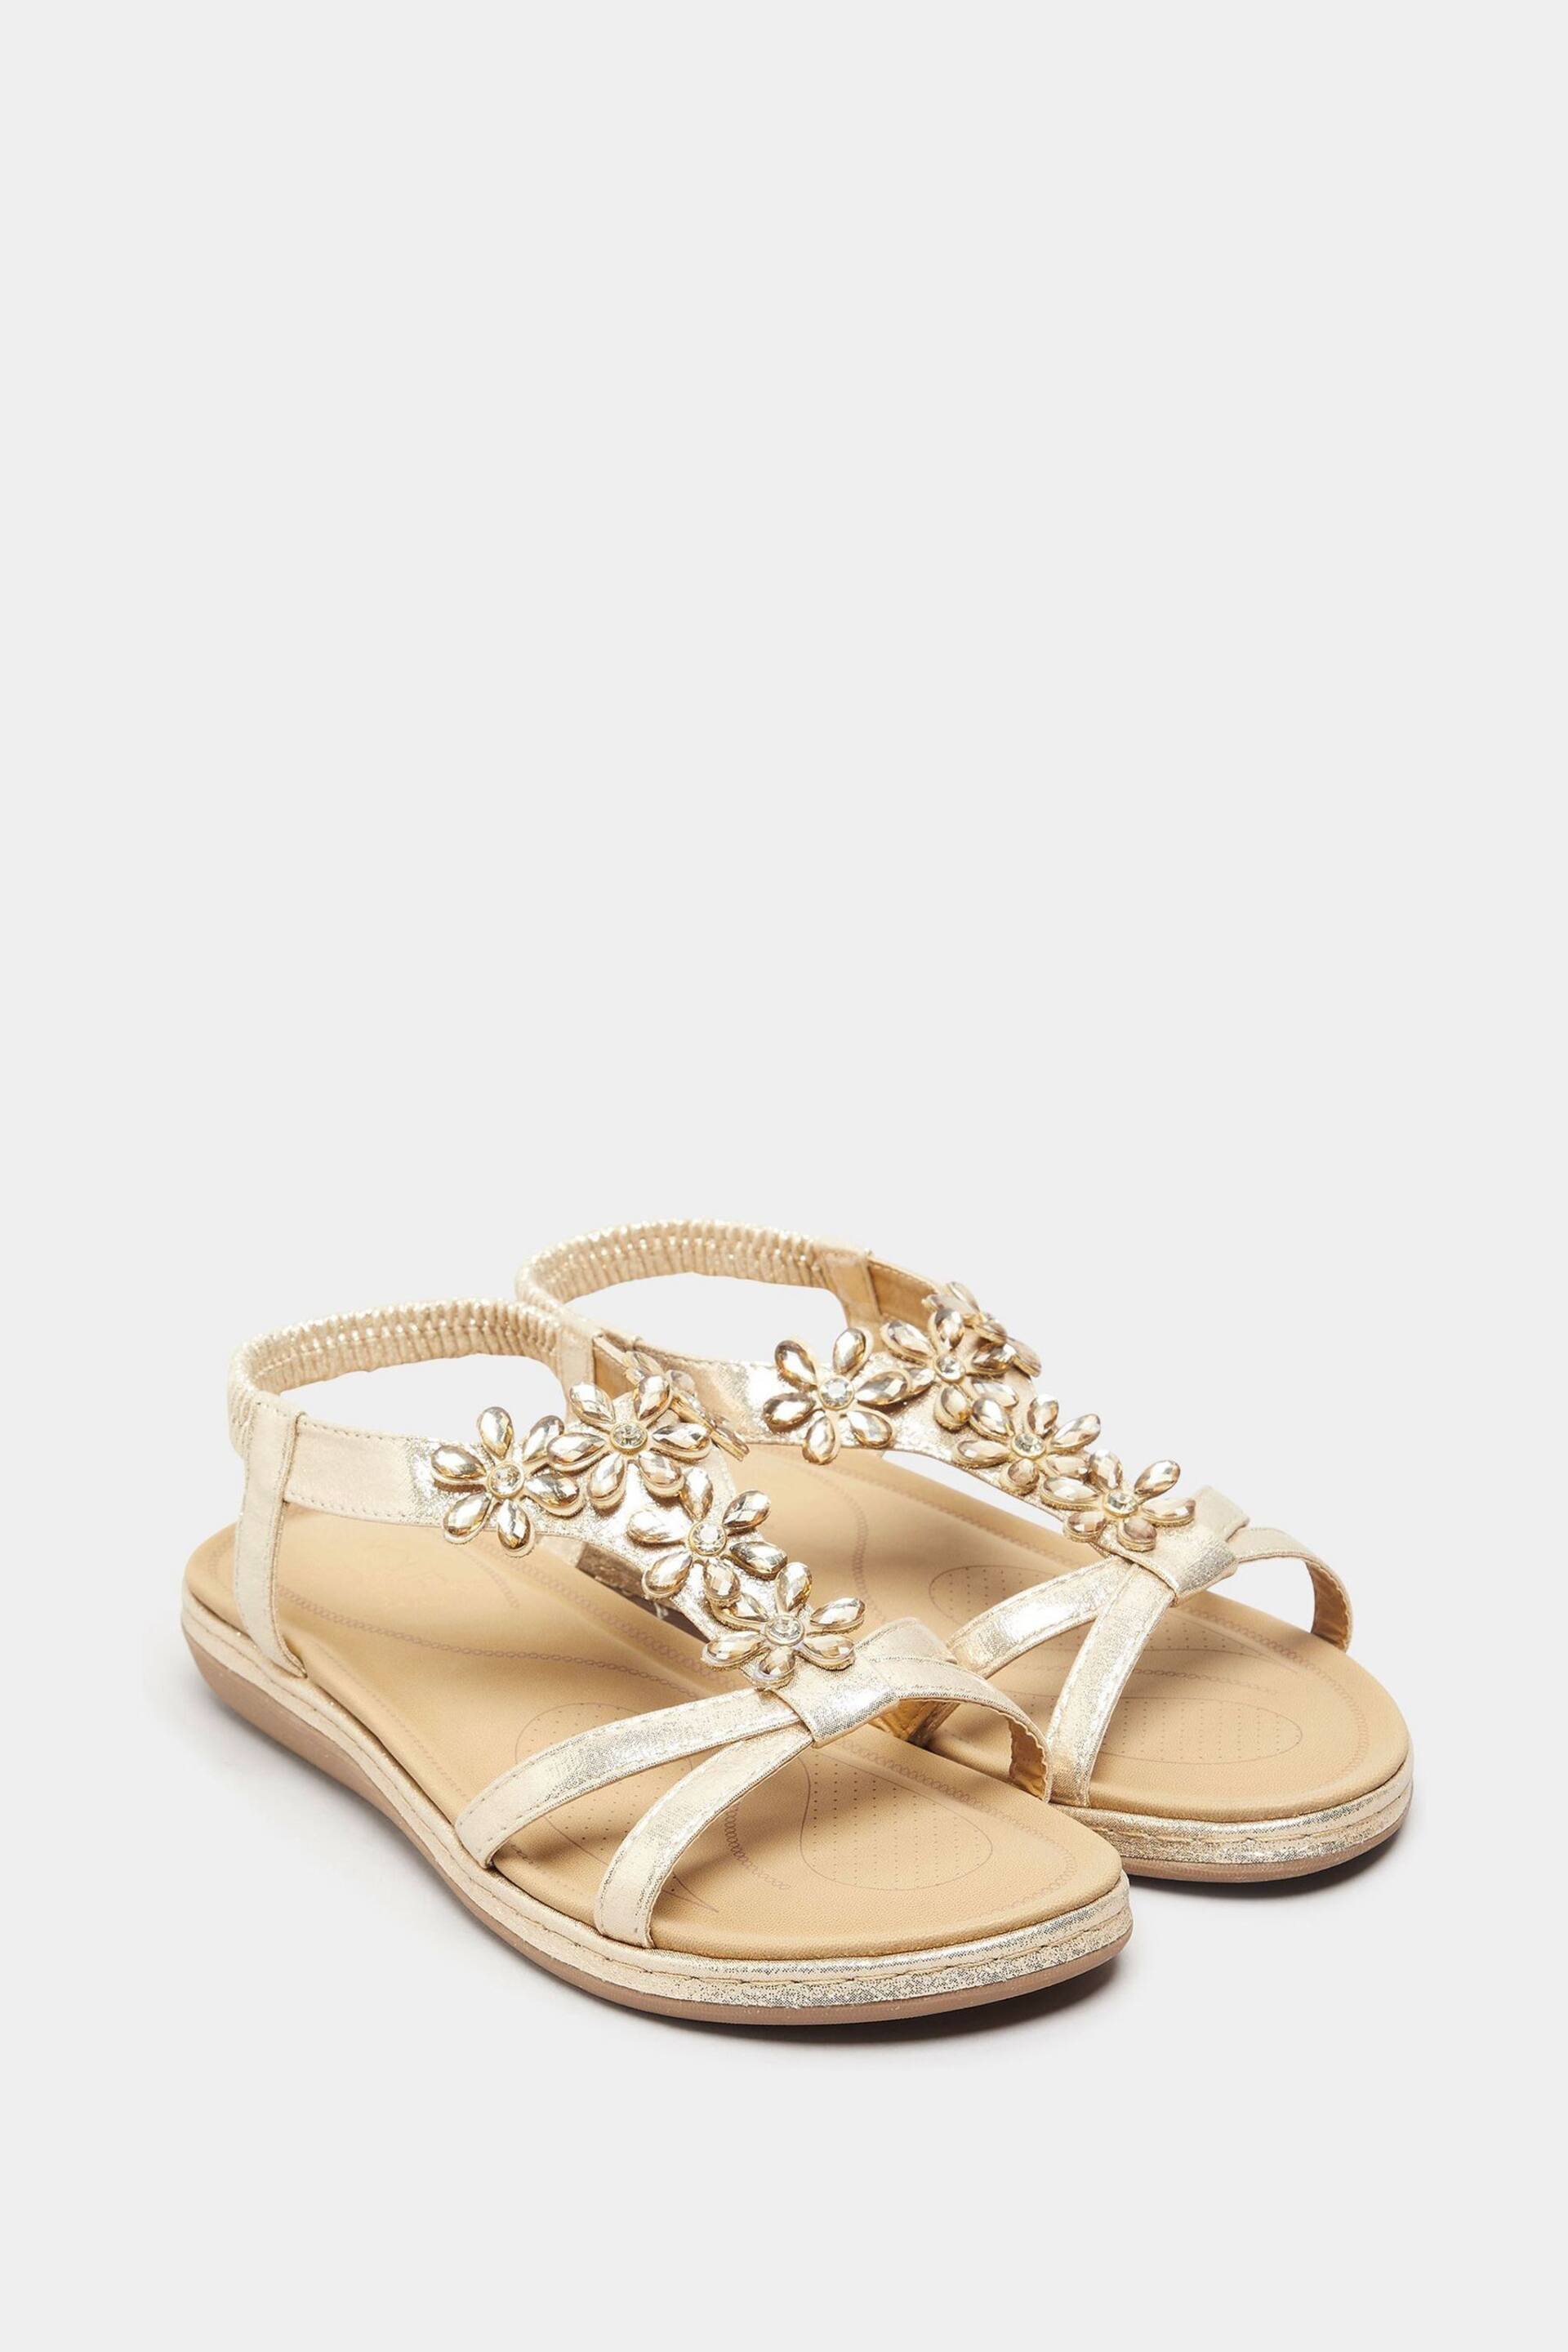 Yours Curve Gold Black Wide Fit Wide Fit Diamante Flower Sandals - Image 4 of 5